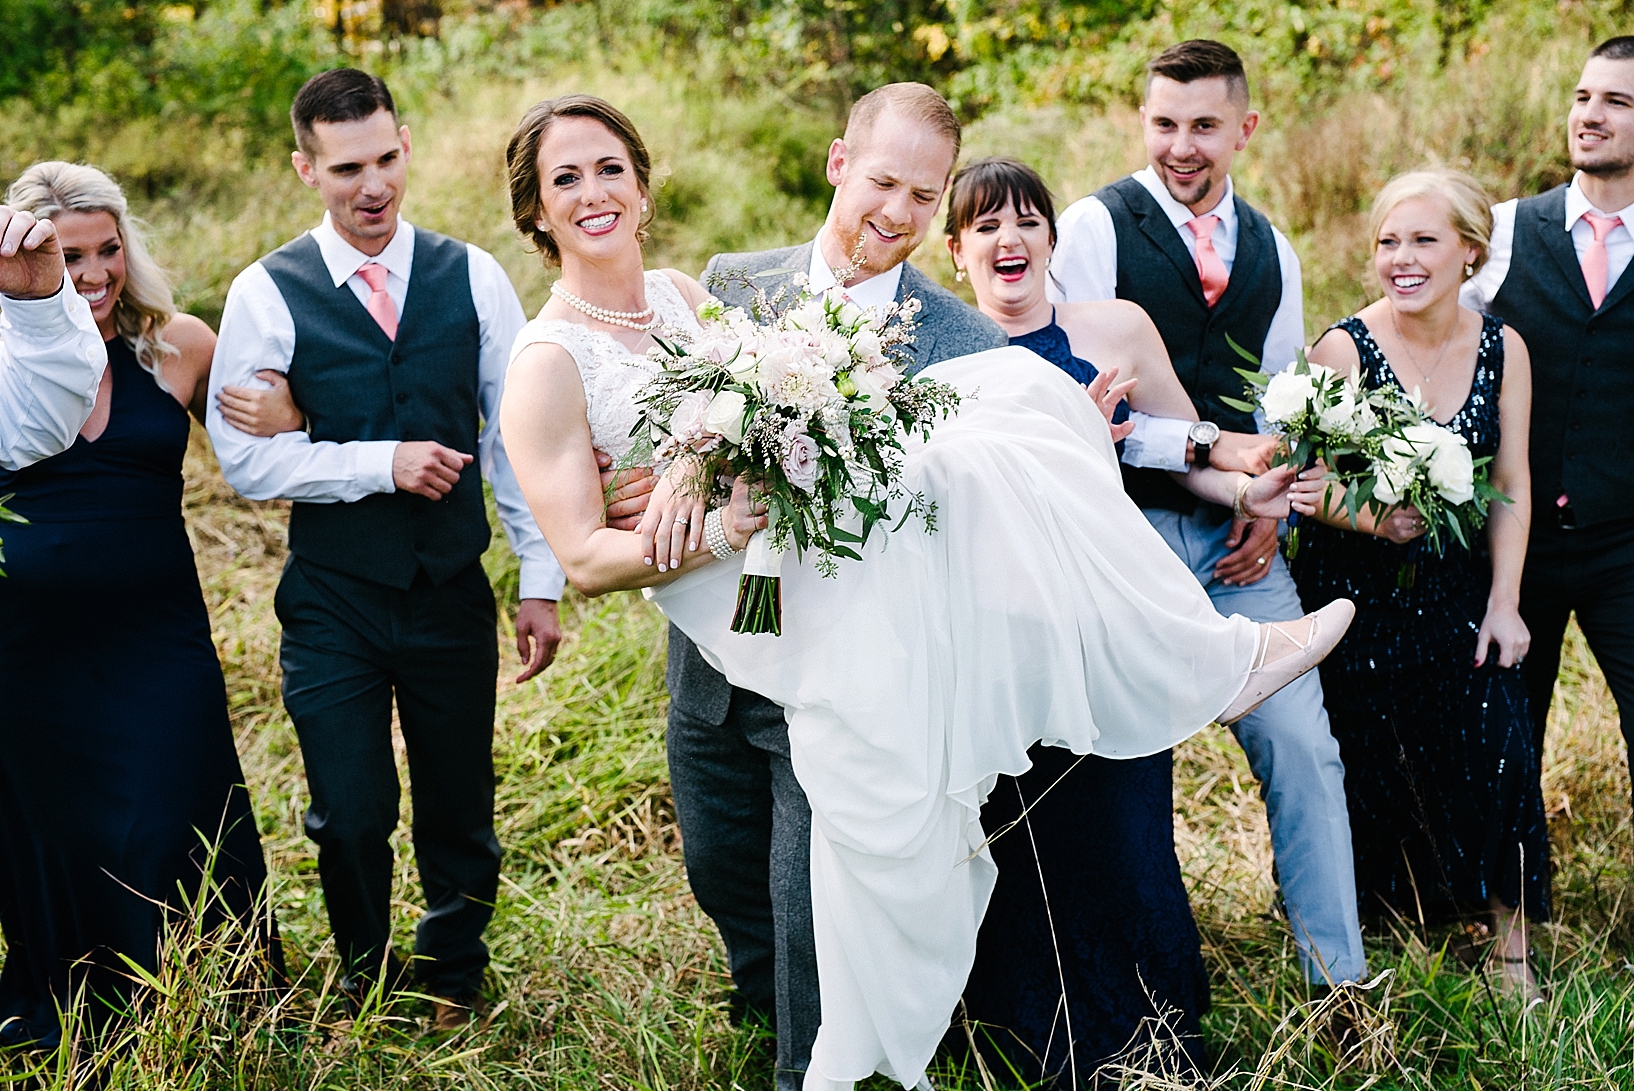 groom carrying bride out of field of grass with bridal party behind him